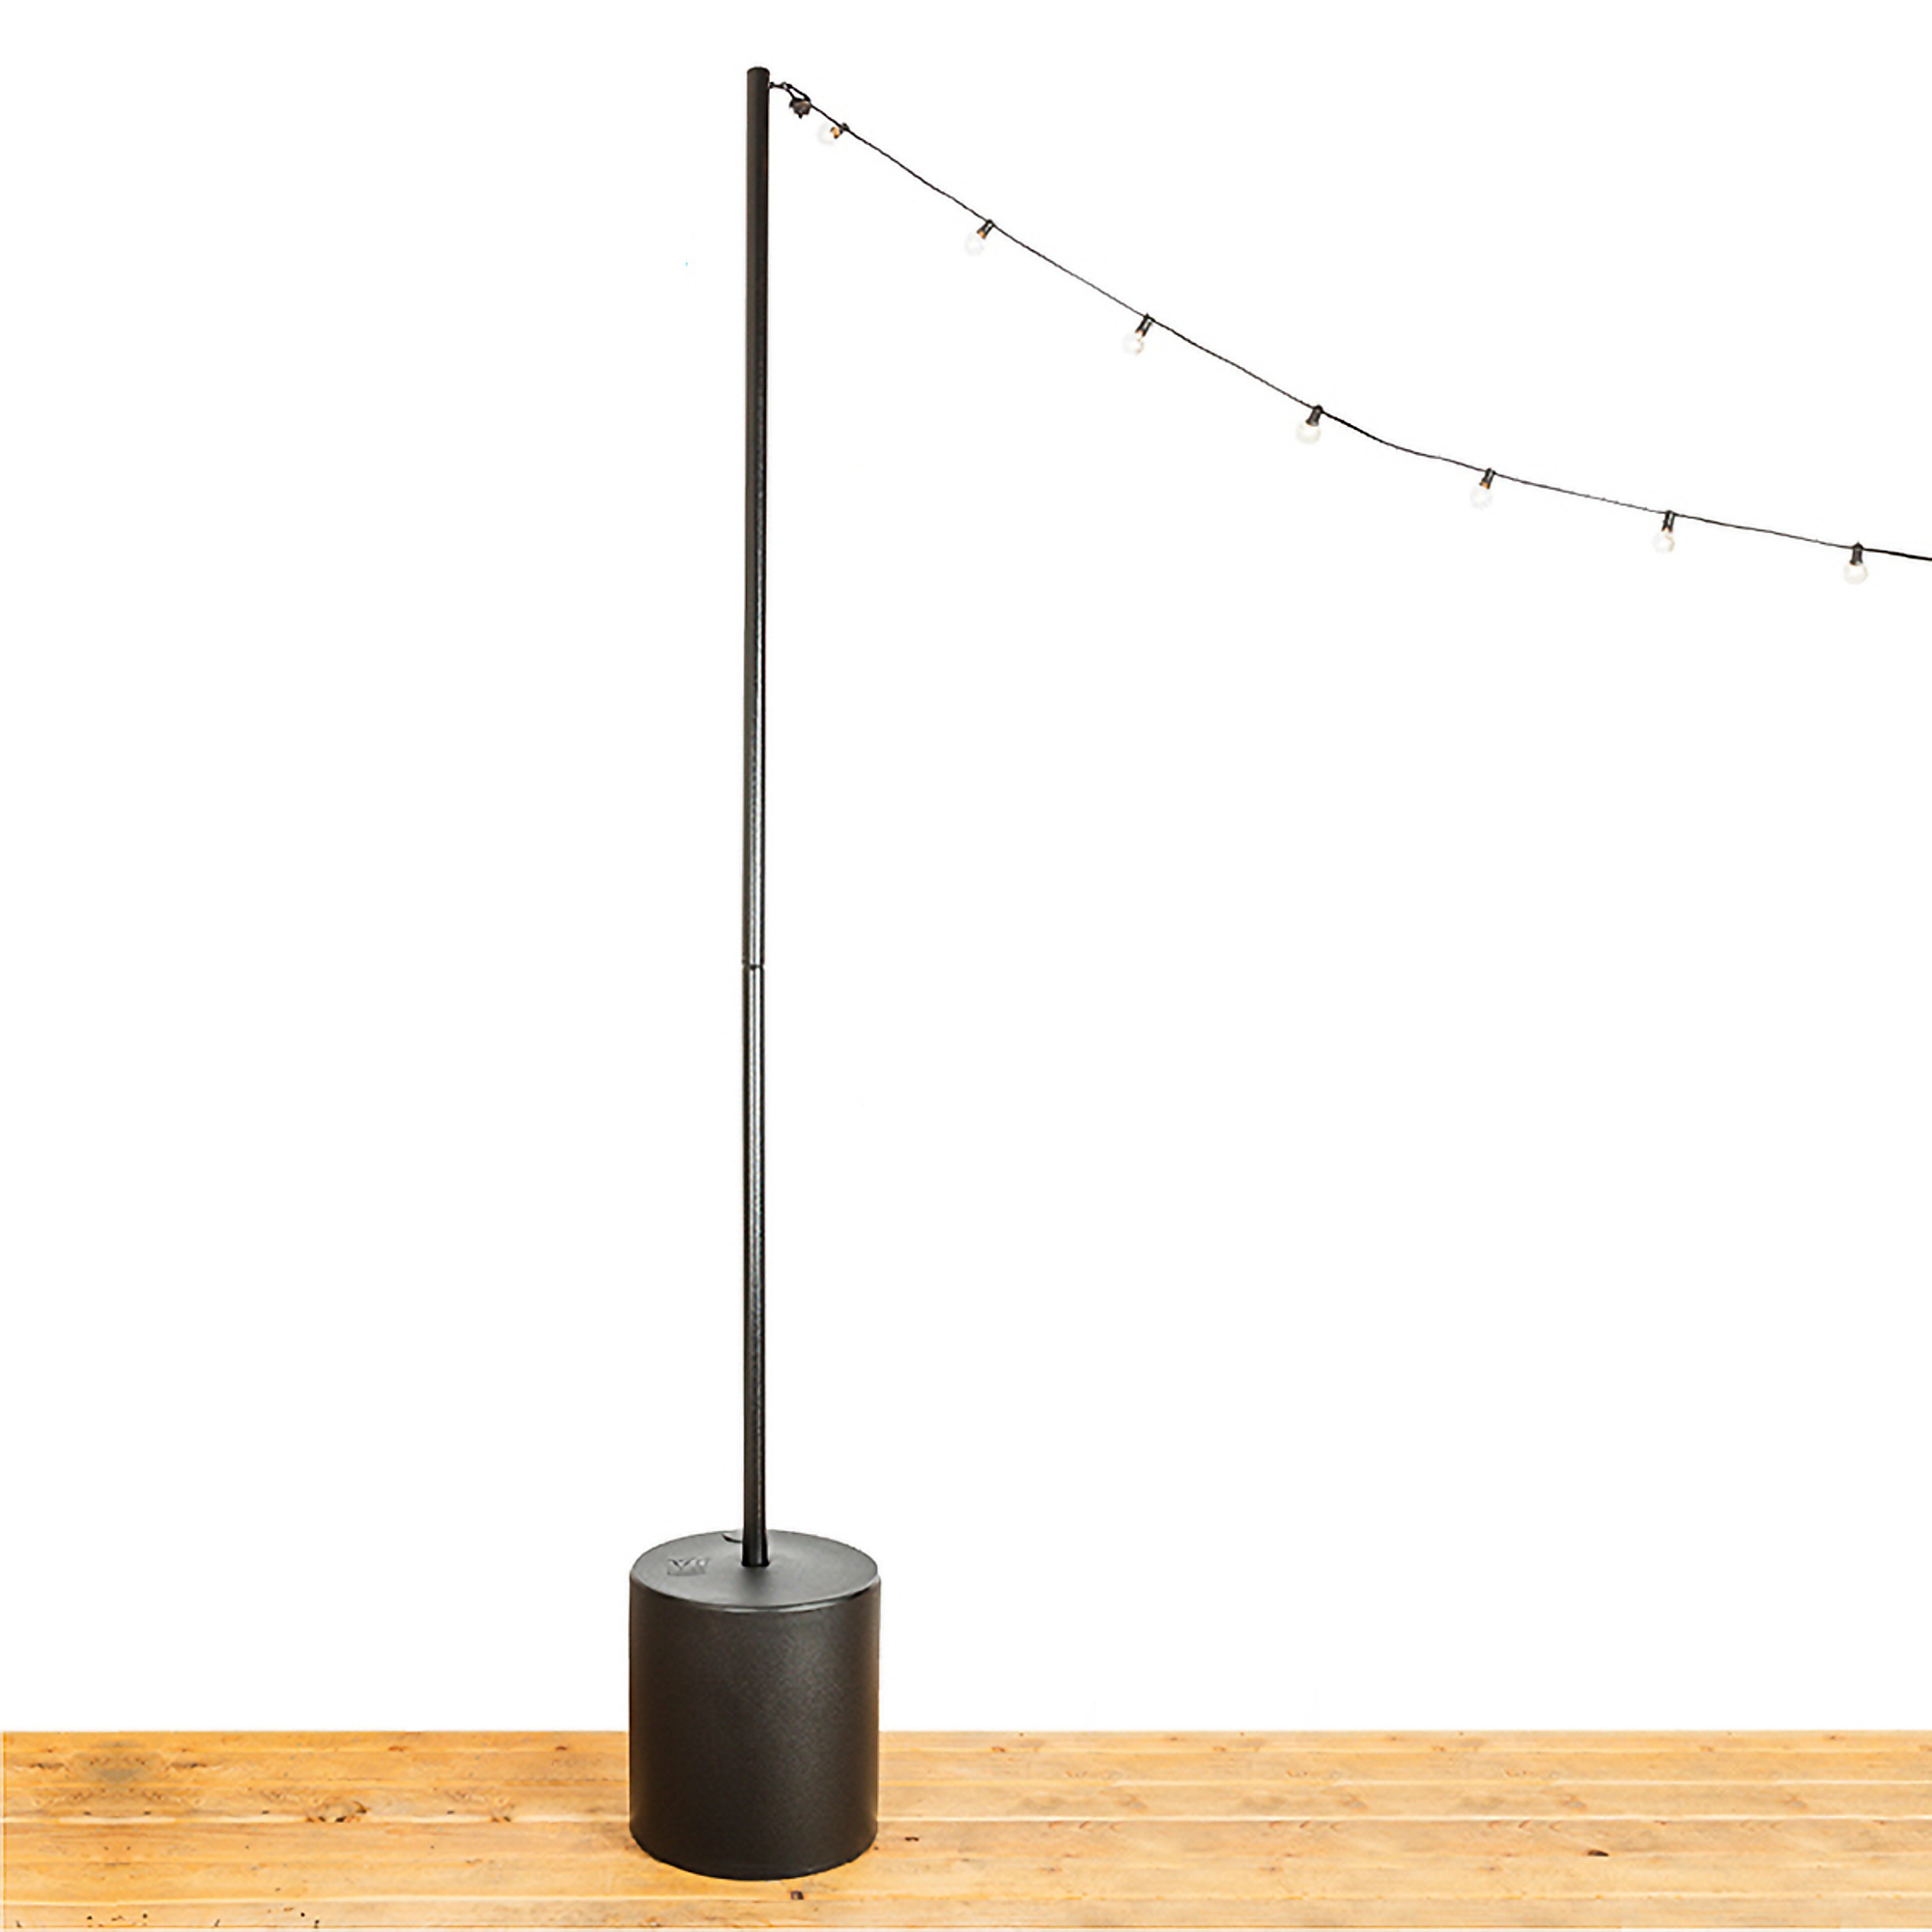 IYN, String Light Pole Stand with Tank Base, Color Black, Included (qty.) 1 Model 32384